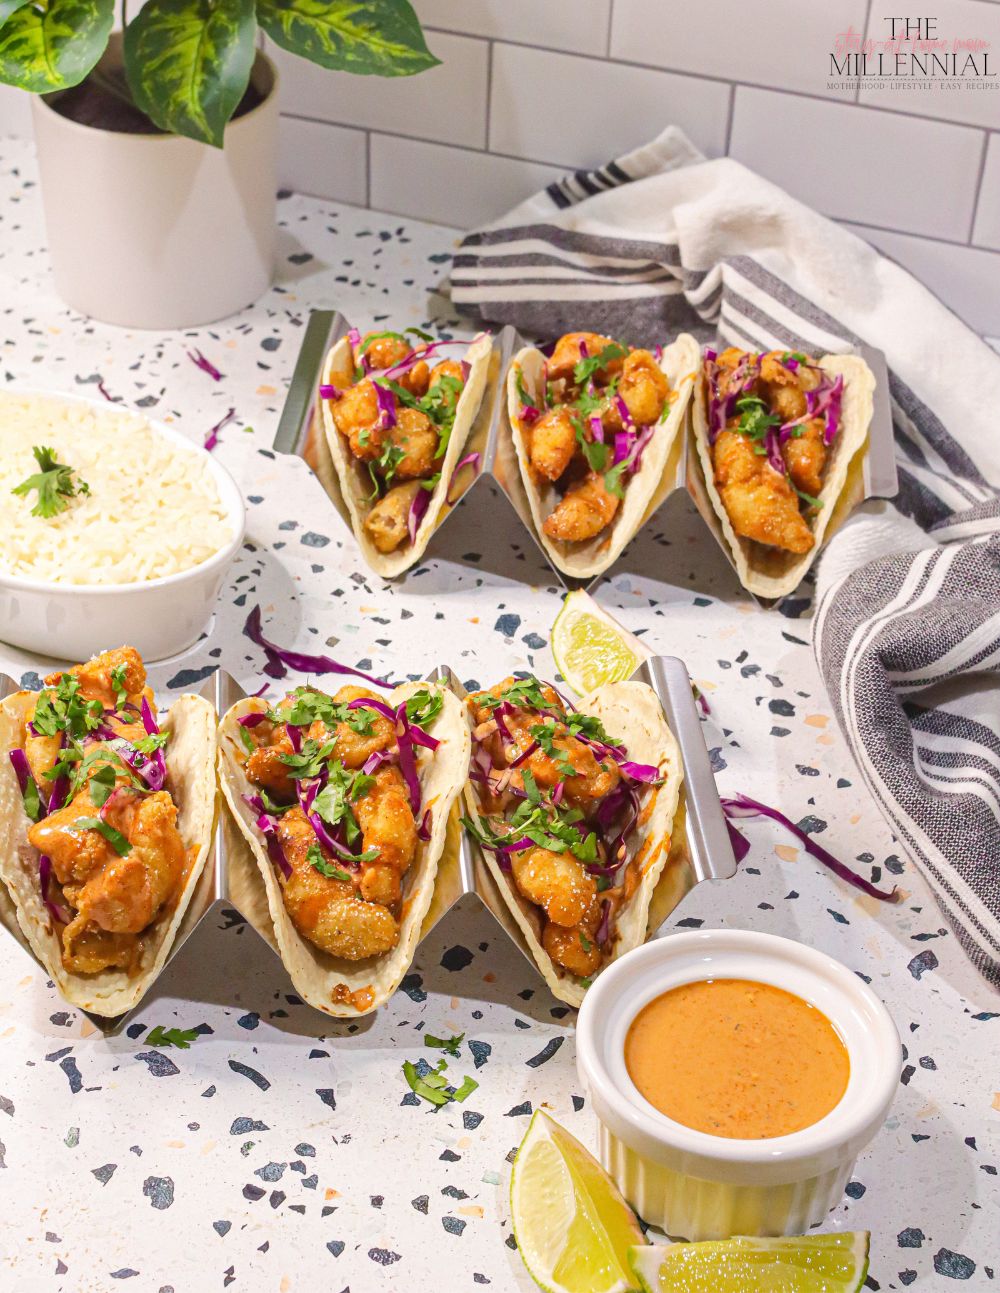 These fried catfish tacos are one of our absolute favorite go-to meals and are the perfect hearty dinner solution for any day of the week!